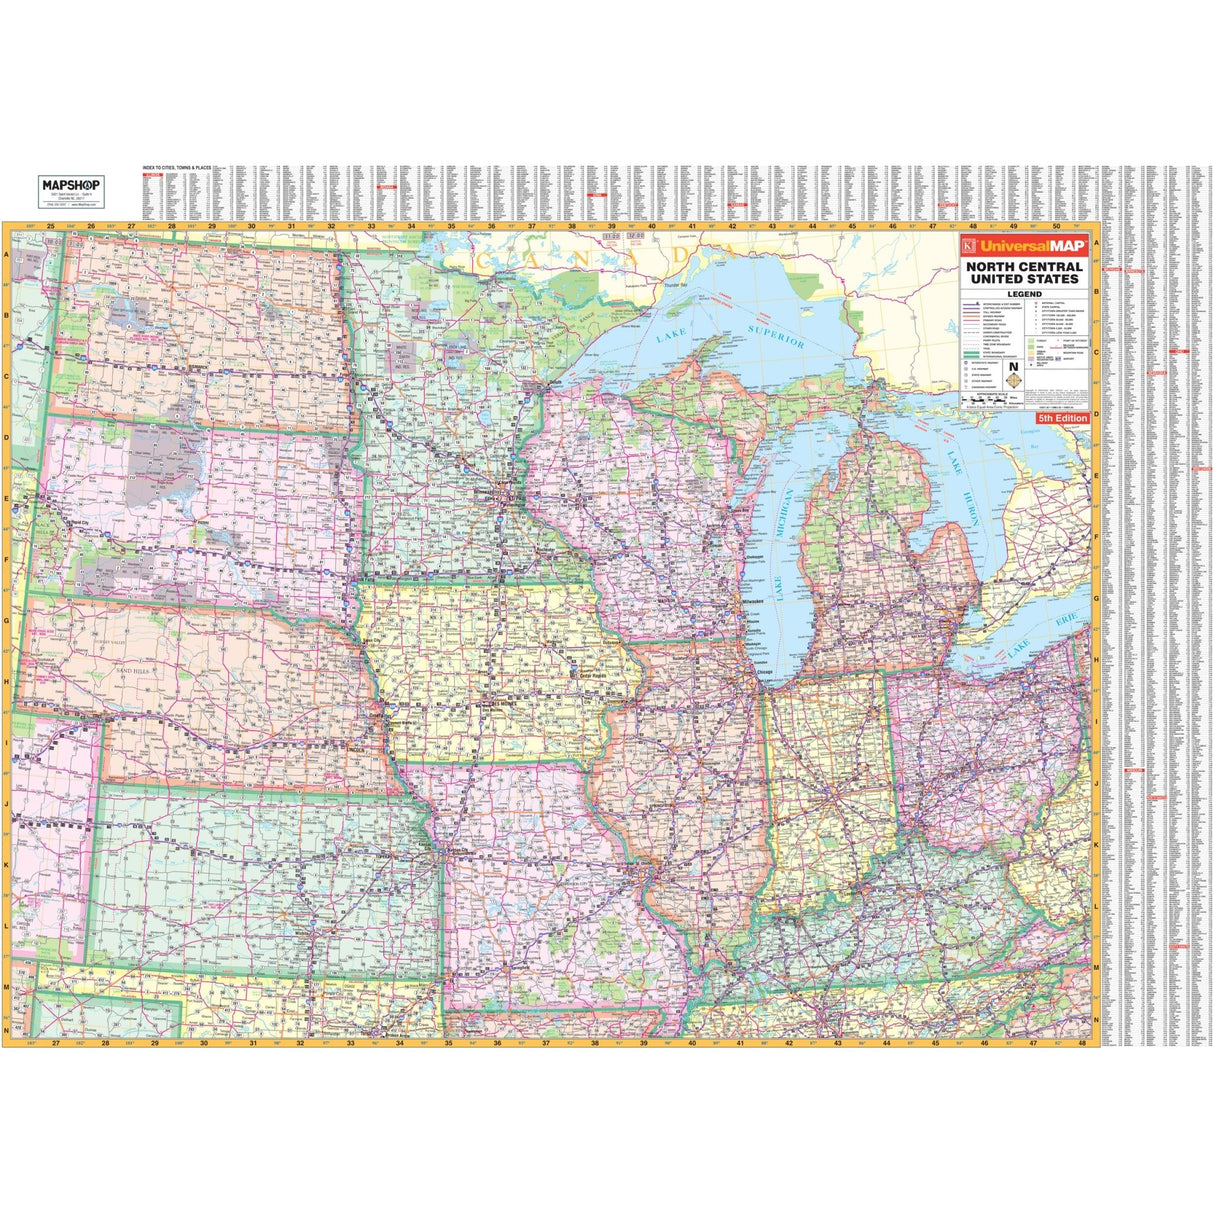 North Central United States Regional Wall Map - KA-R-US-NORTHCENTRAL-PAPER - Ultimate Globes